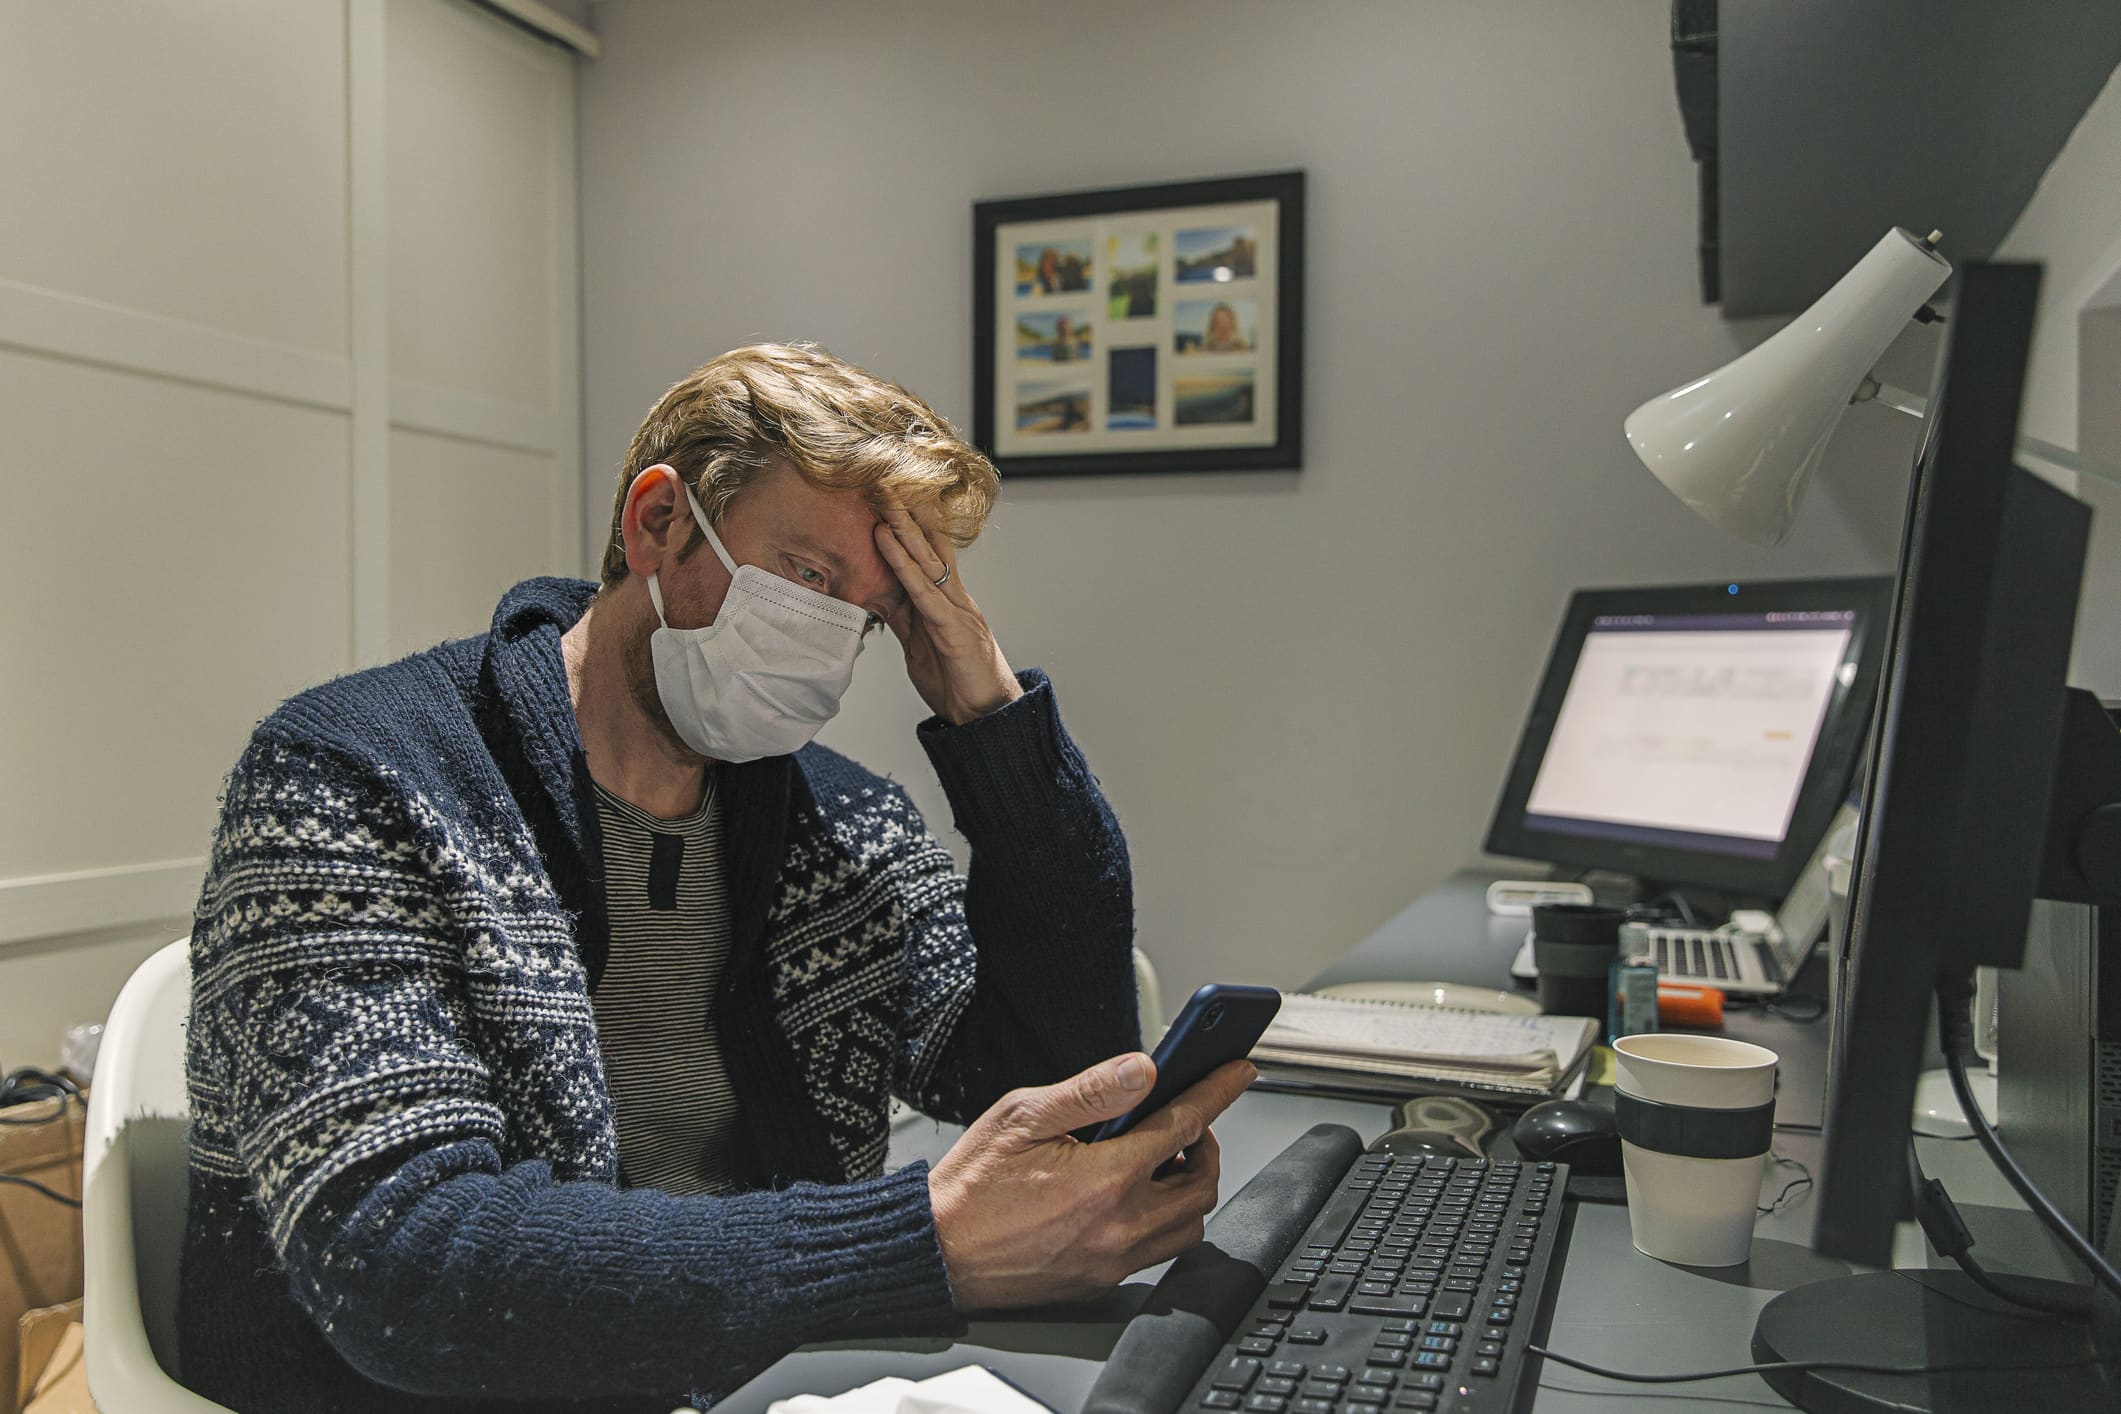 Unemployed Americans struggle to get free health insurance in pandemic